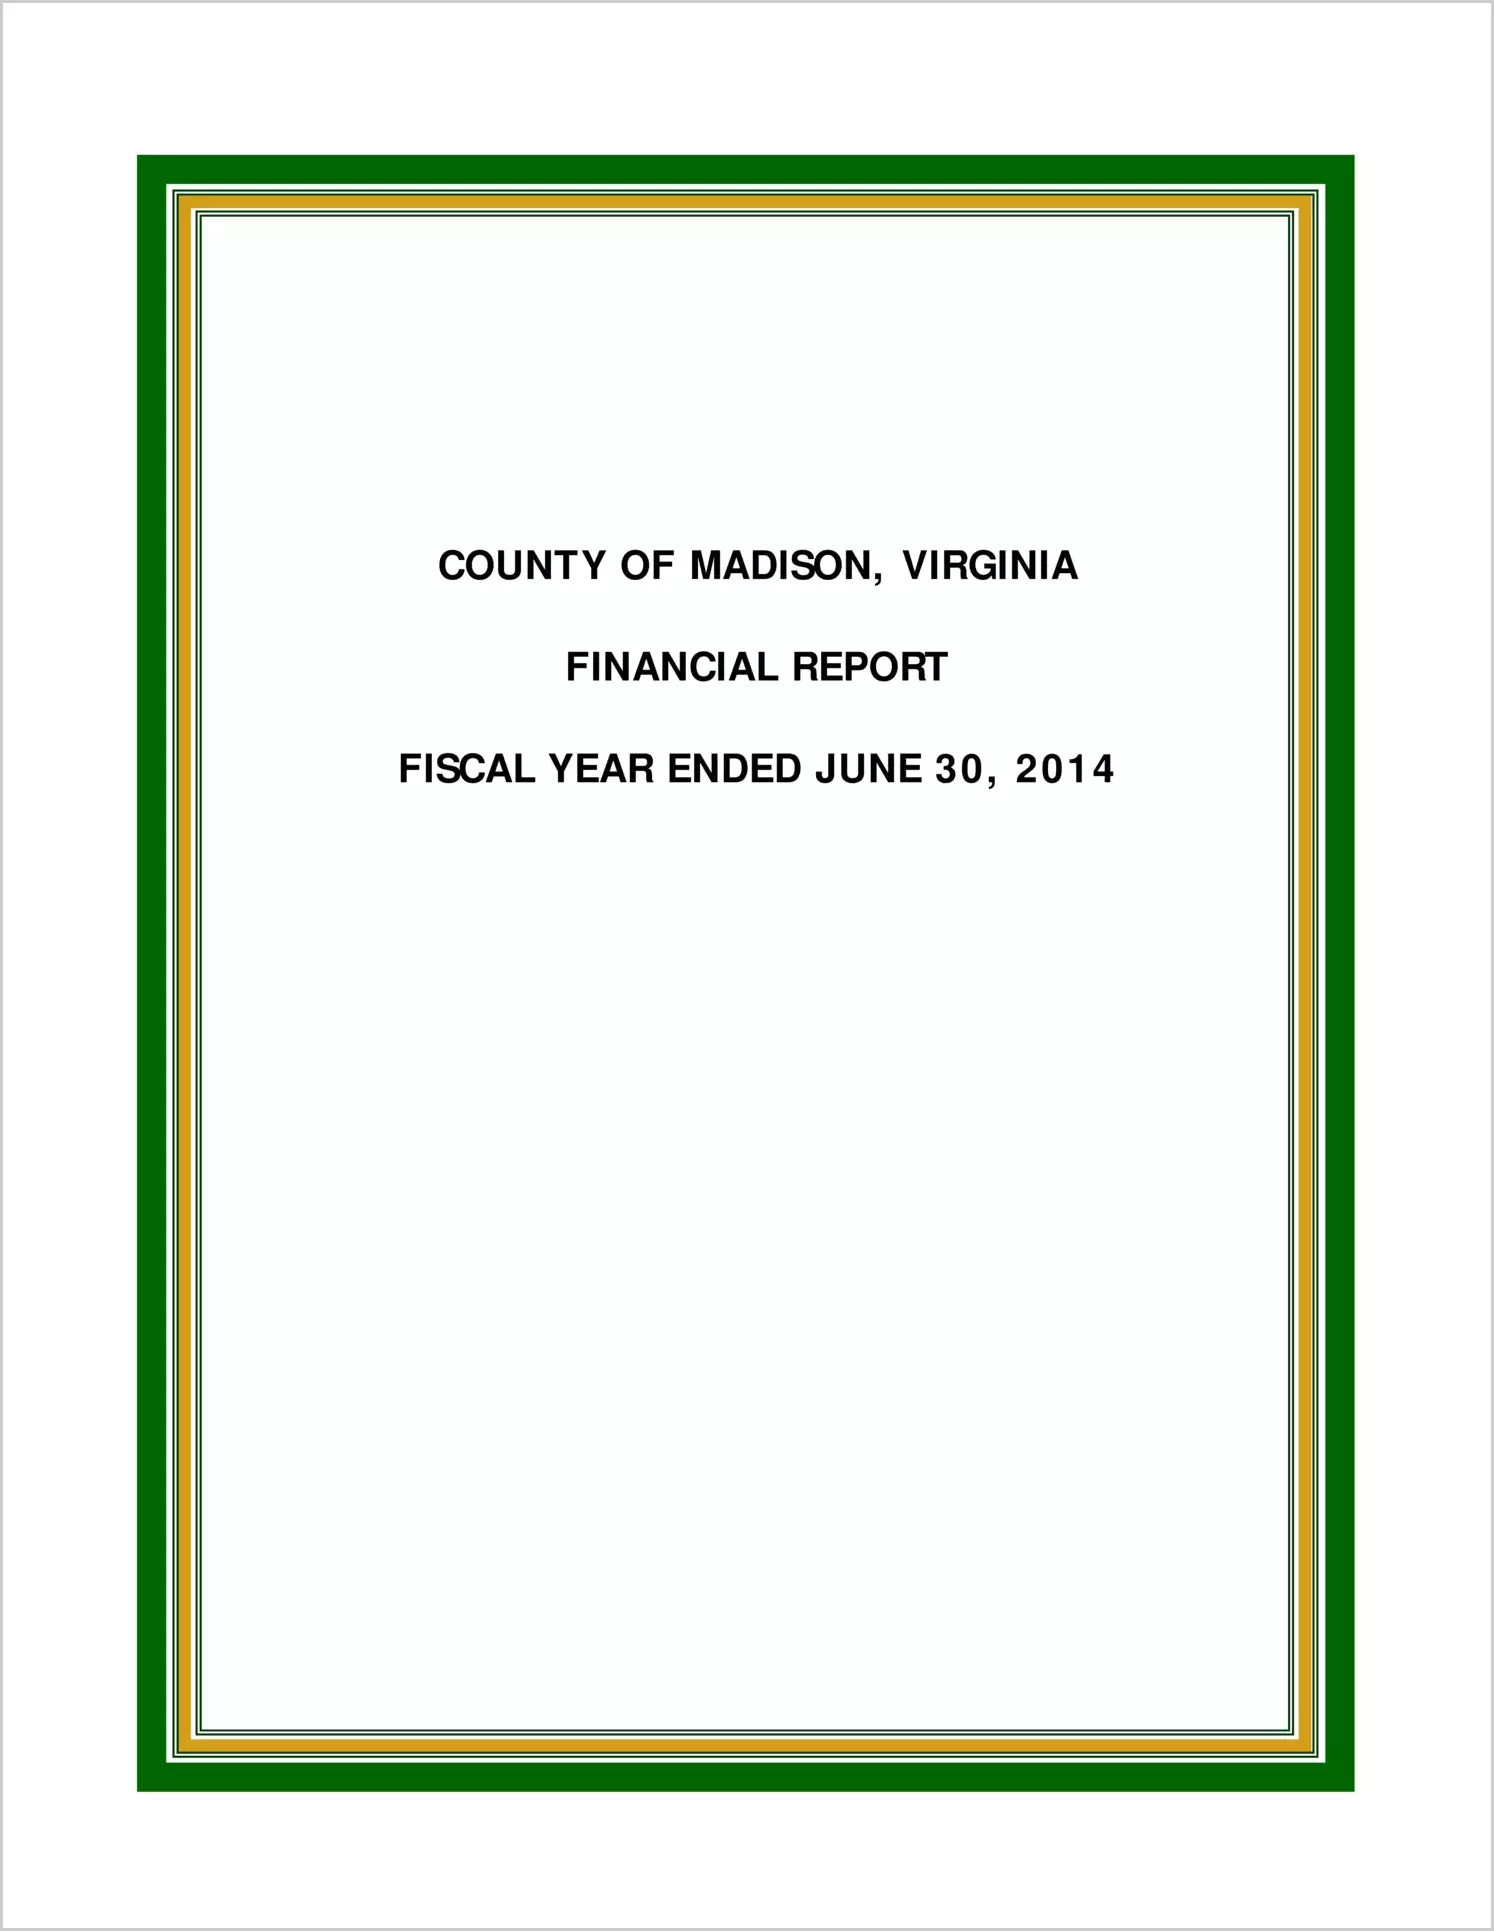 2014 Annual Financial Report for County of Madison